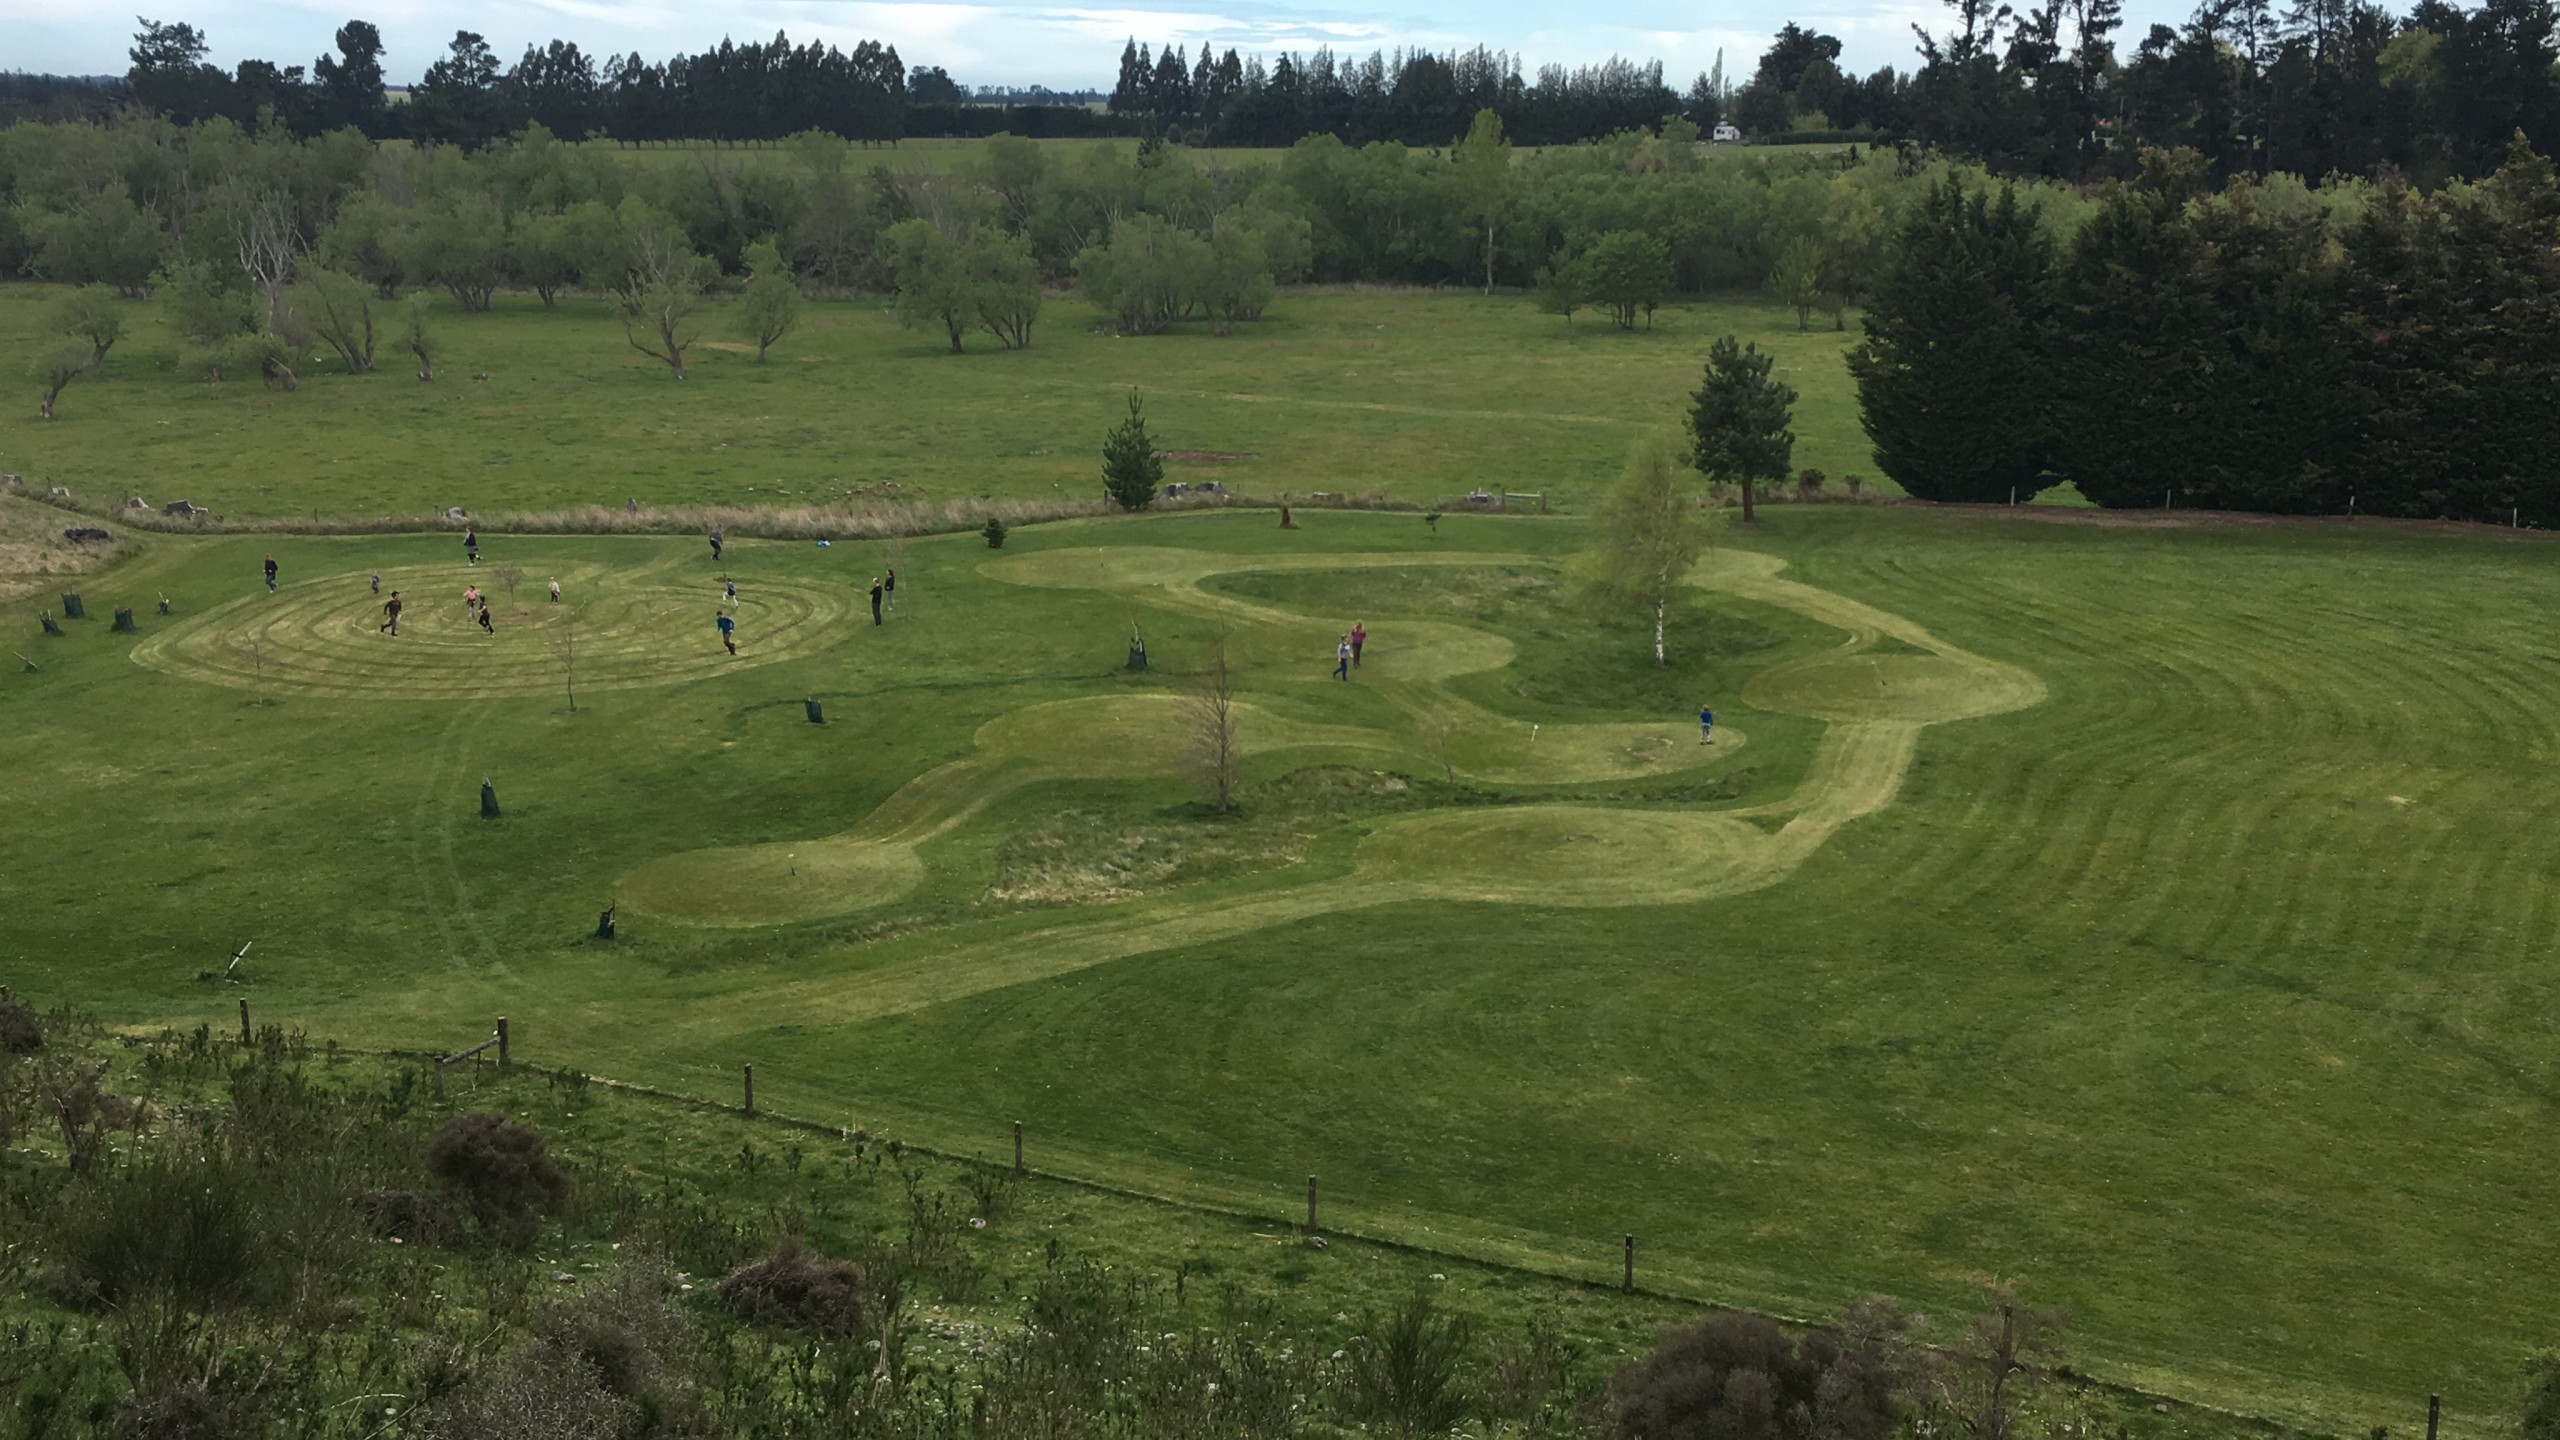 8-hole pitch & putt course and prayer labyrinth